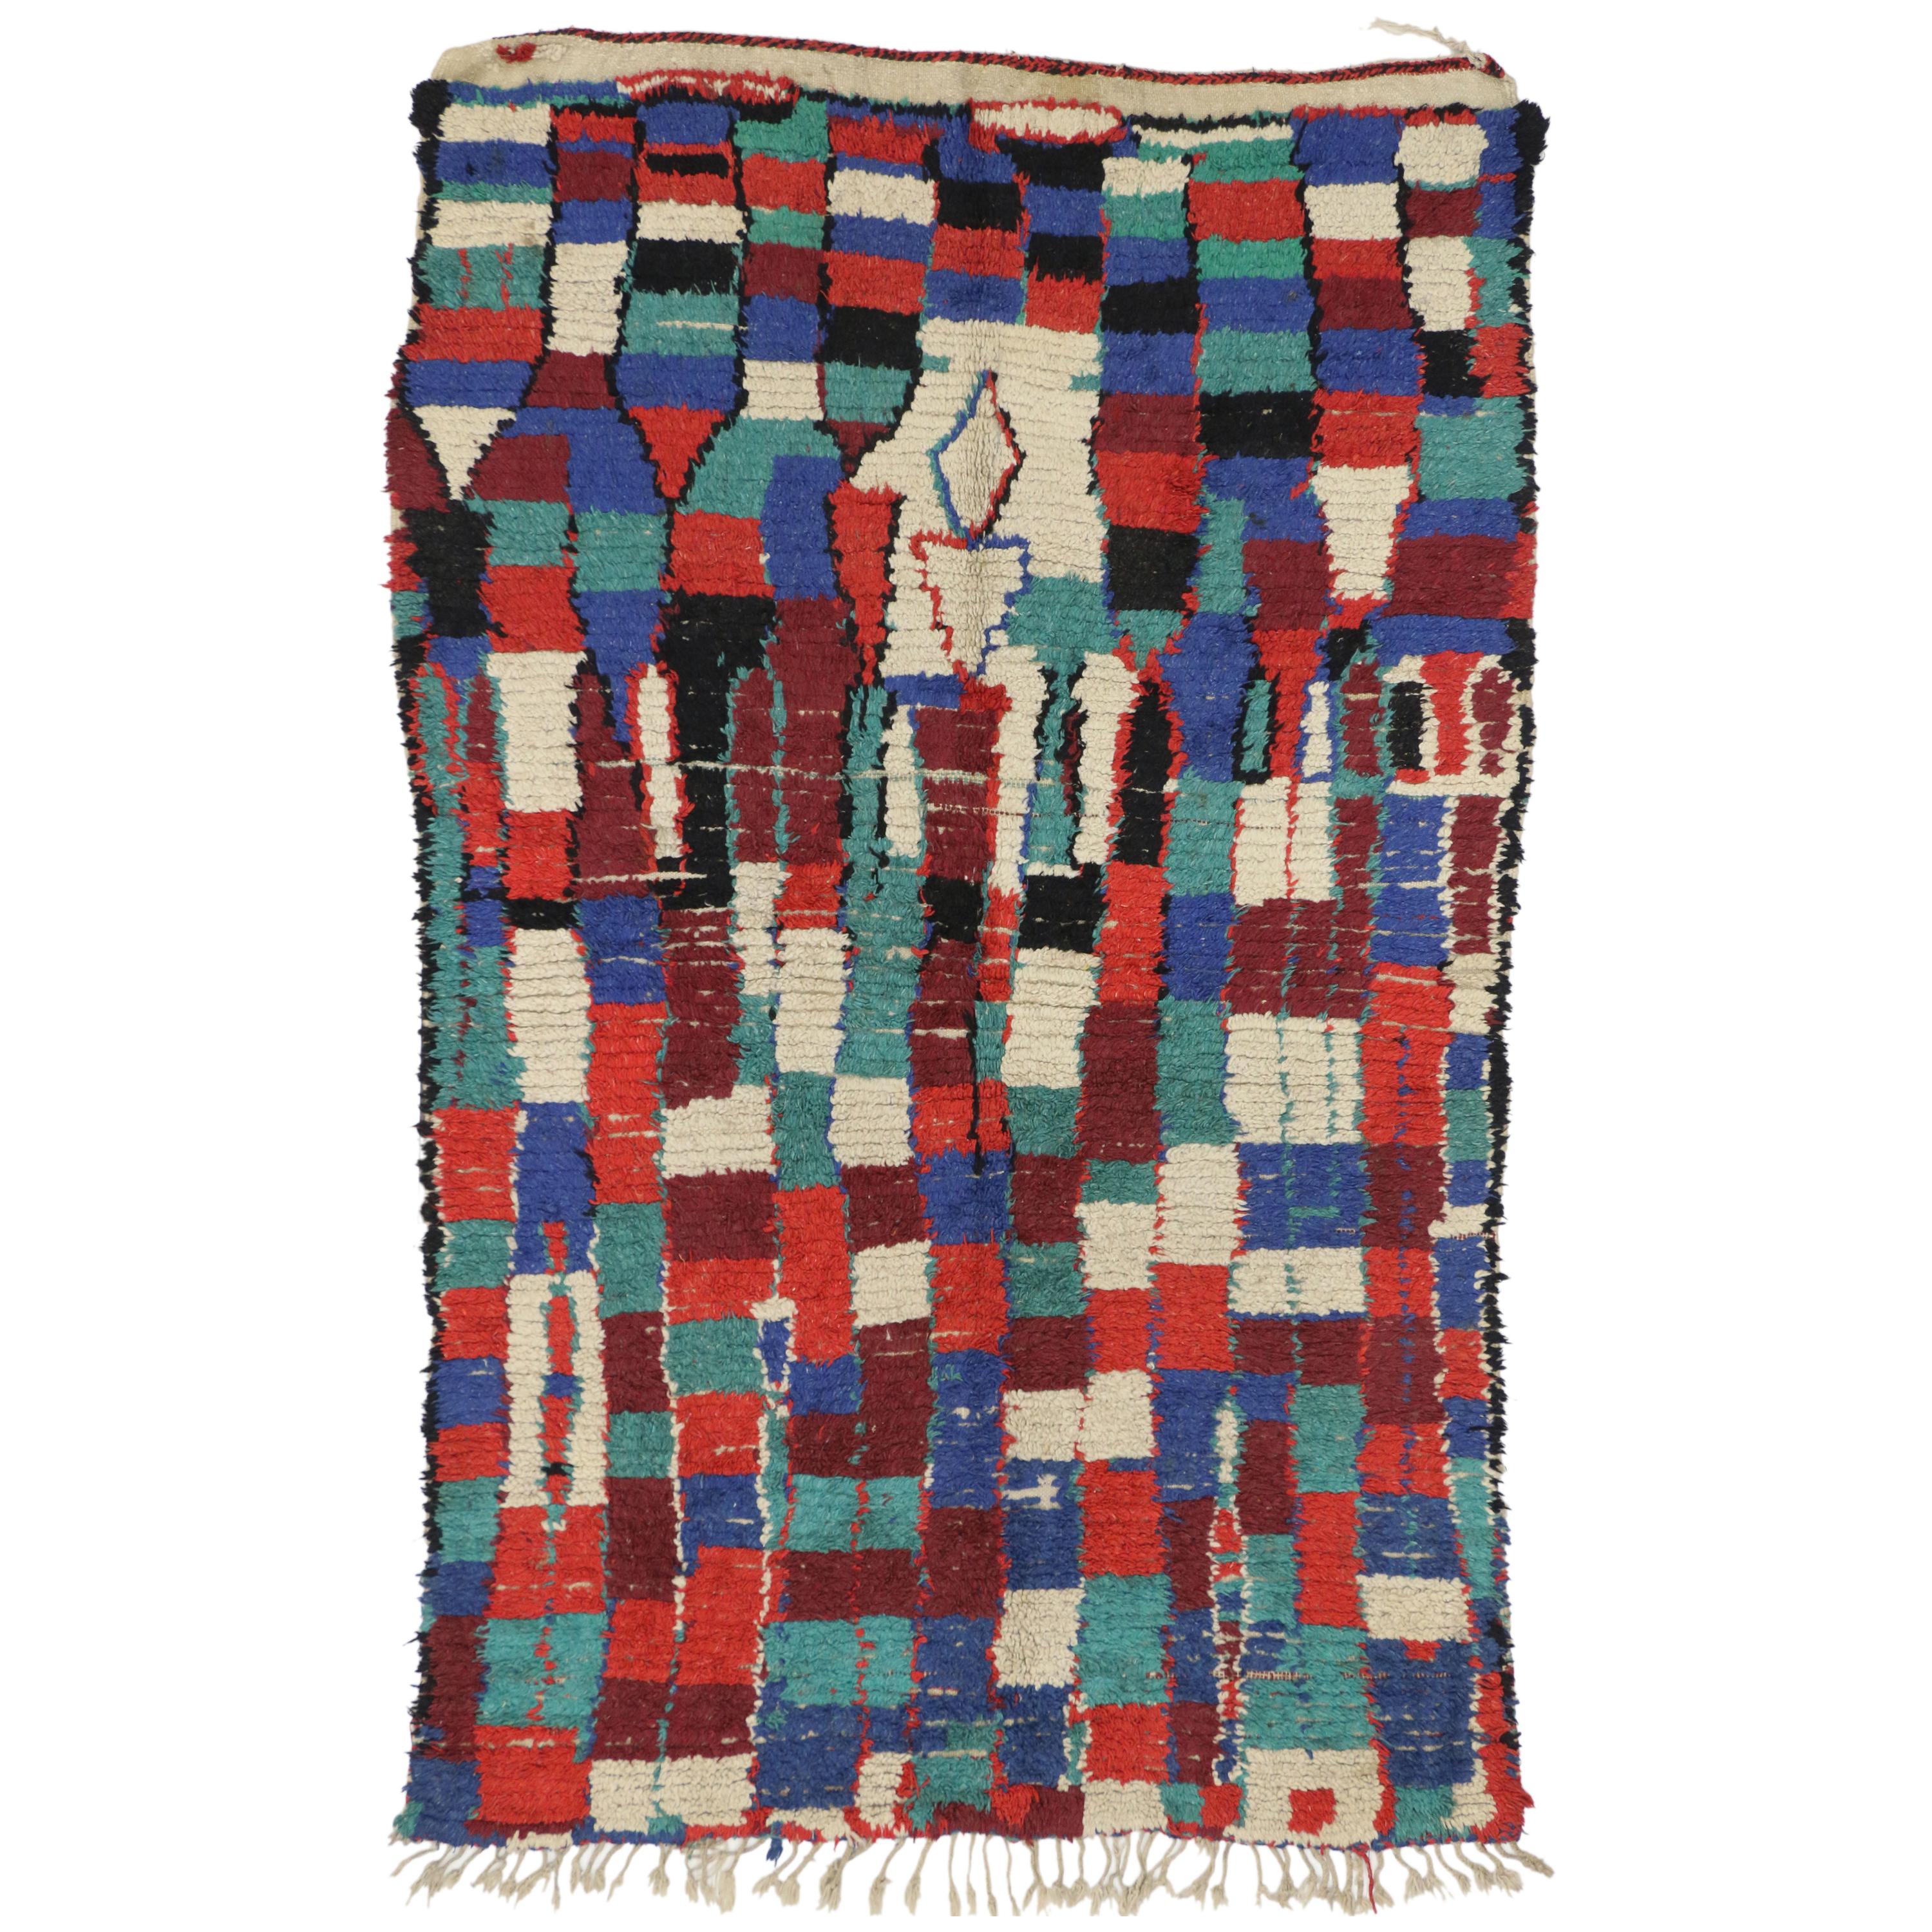 74550, vintage Berber Moroccan Azilal rug with Postmodern Bauhaus and Cubism style. This hand knotted wool contemporary Berber Moroccan Azilal rug with Postmodern Bauhaus and Cubism style features an asymmetrical graphic block pattern and ambiguous